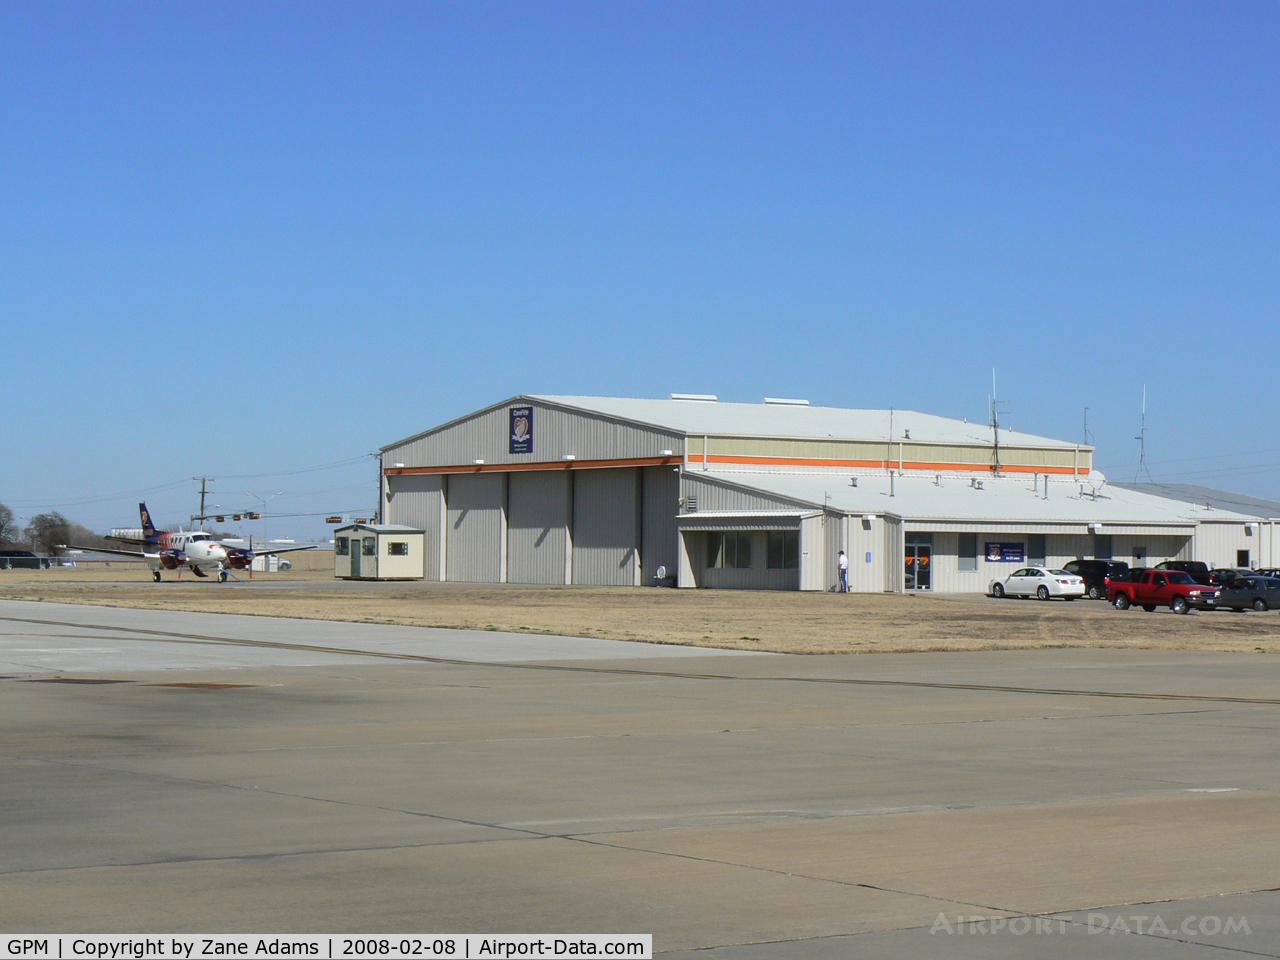 Grand Prairie Municipal Airport (GPM) - Care Flight - Home Base and Maintainence Hanger